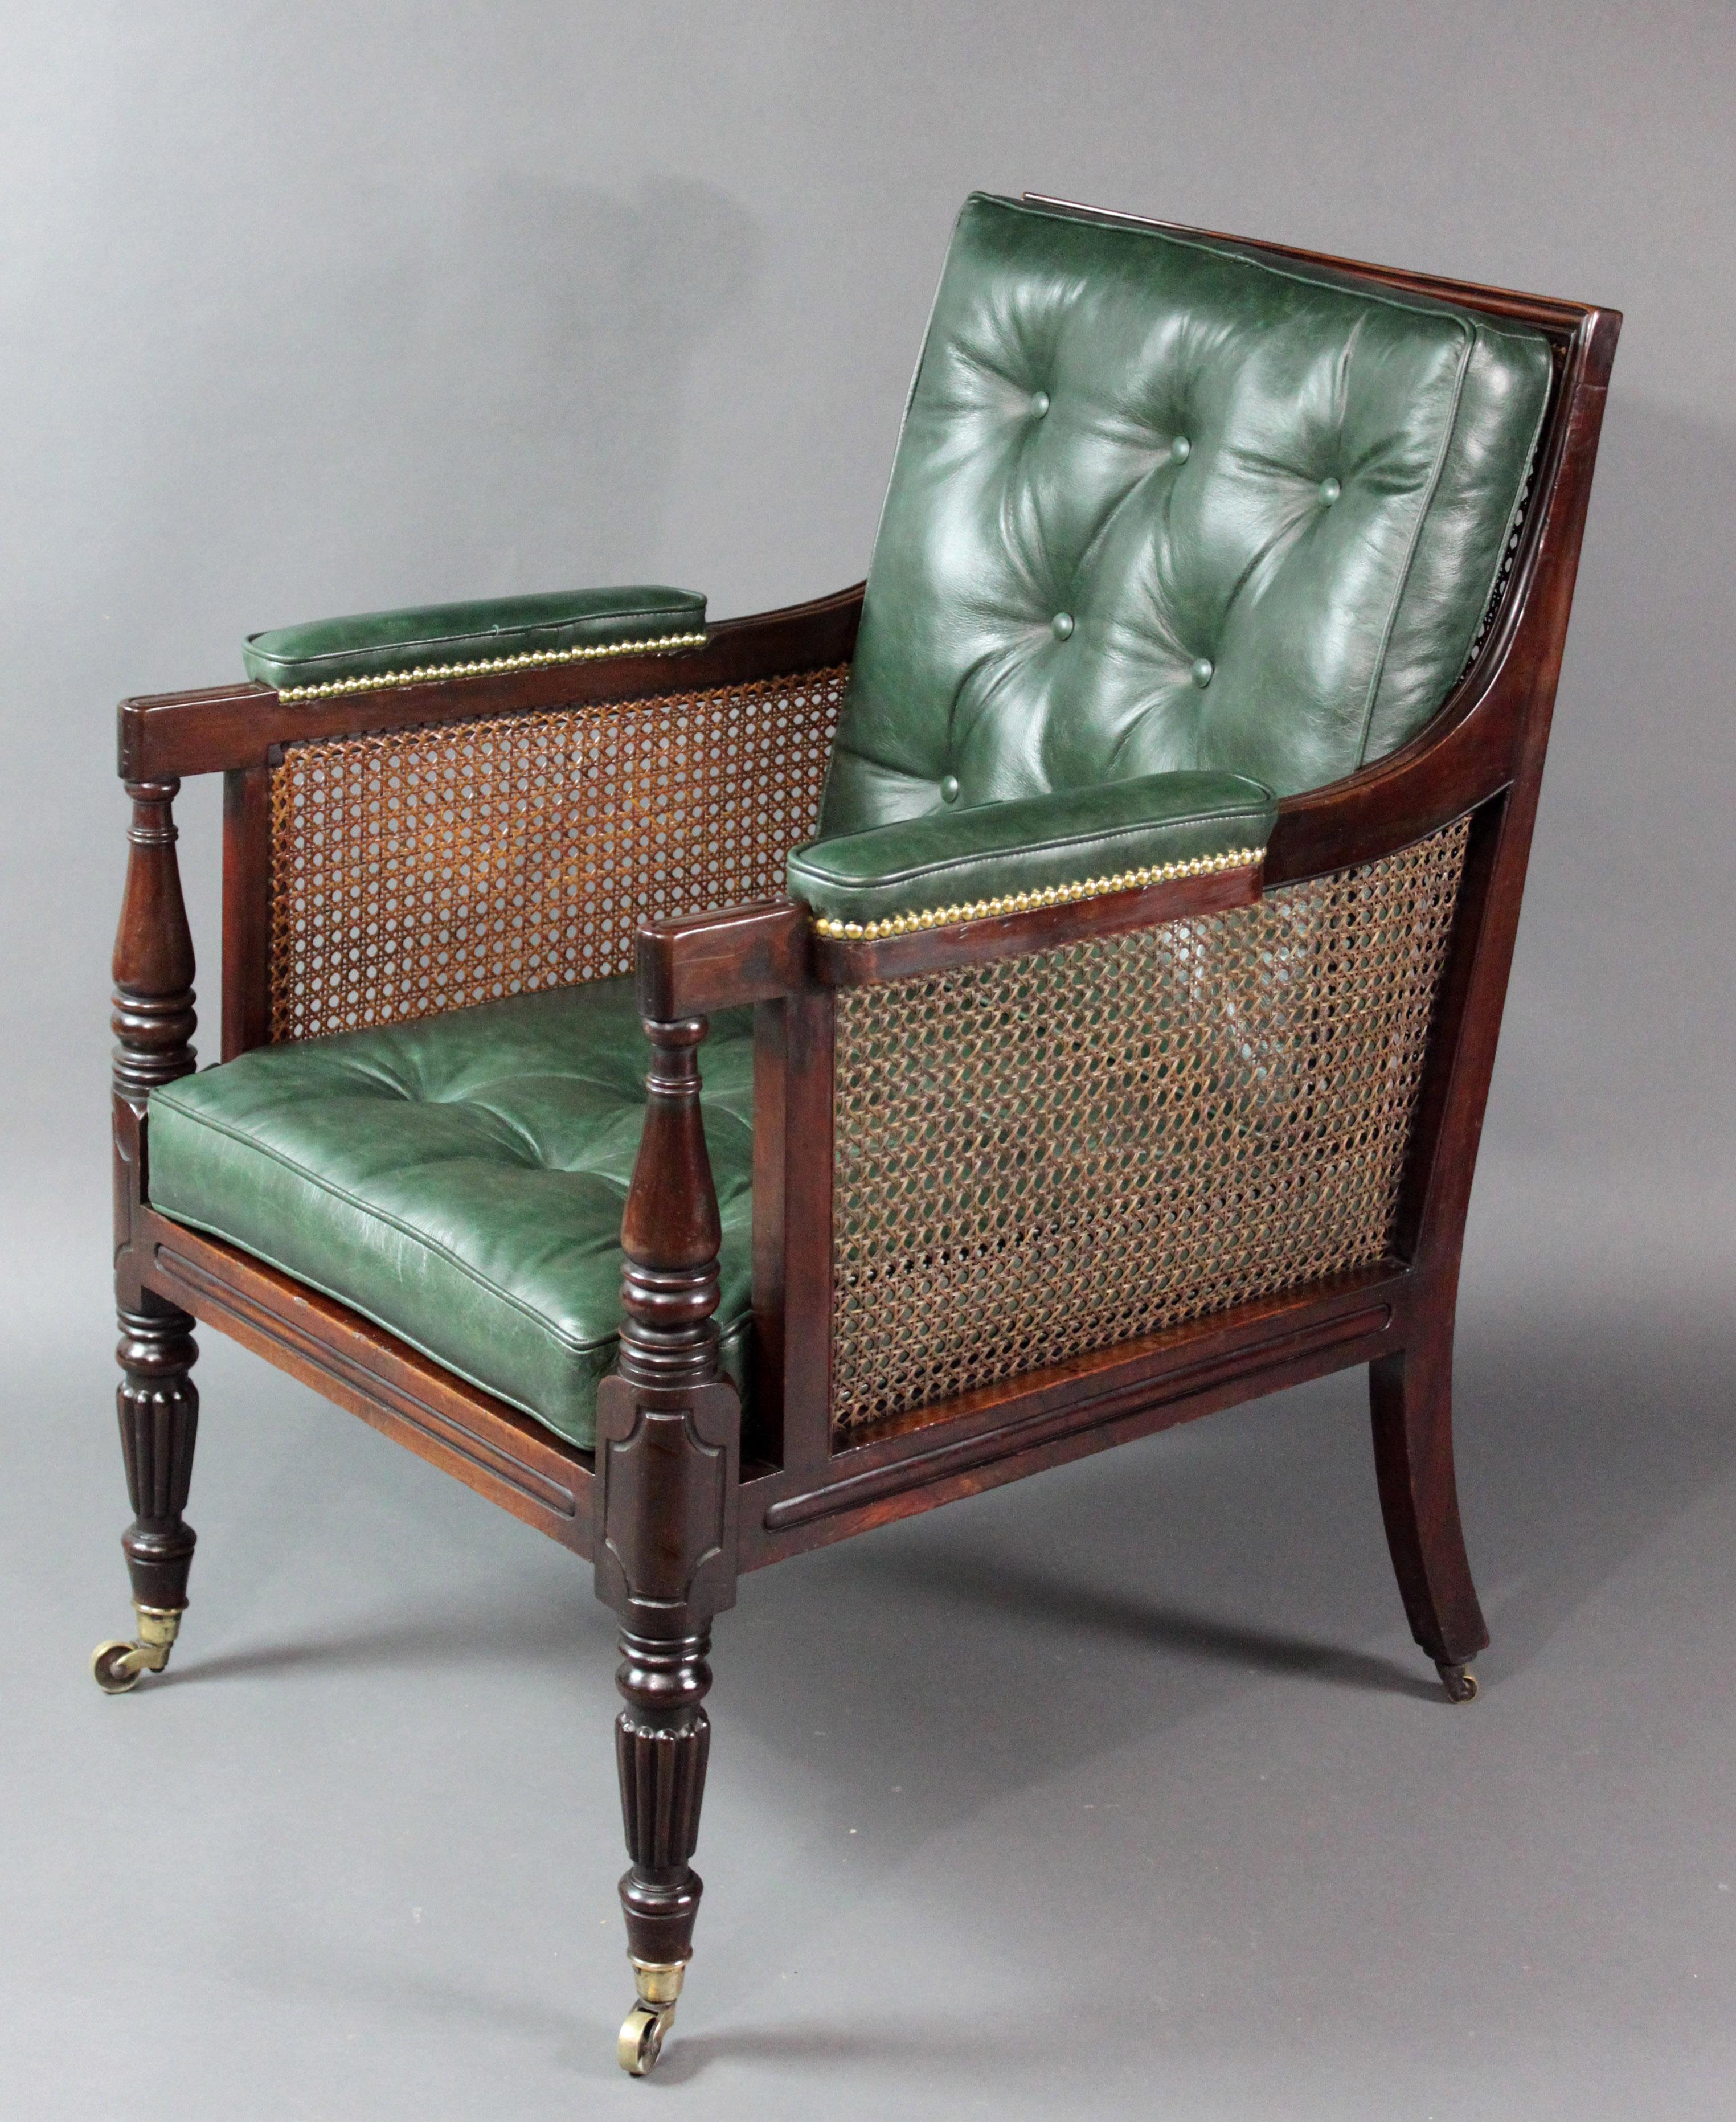 Regency mahogany bergère chair of a good large size; original color and patina, carved reeding on the legs, seat rail, arm rests and the framing around the back, original caning on the sides and the back, the seat is webbed and has never been caned;